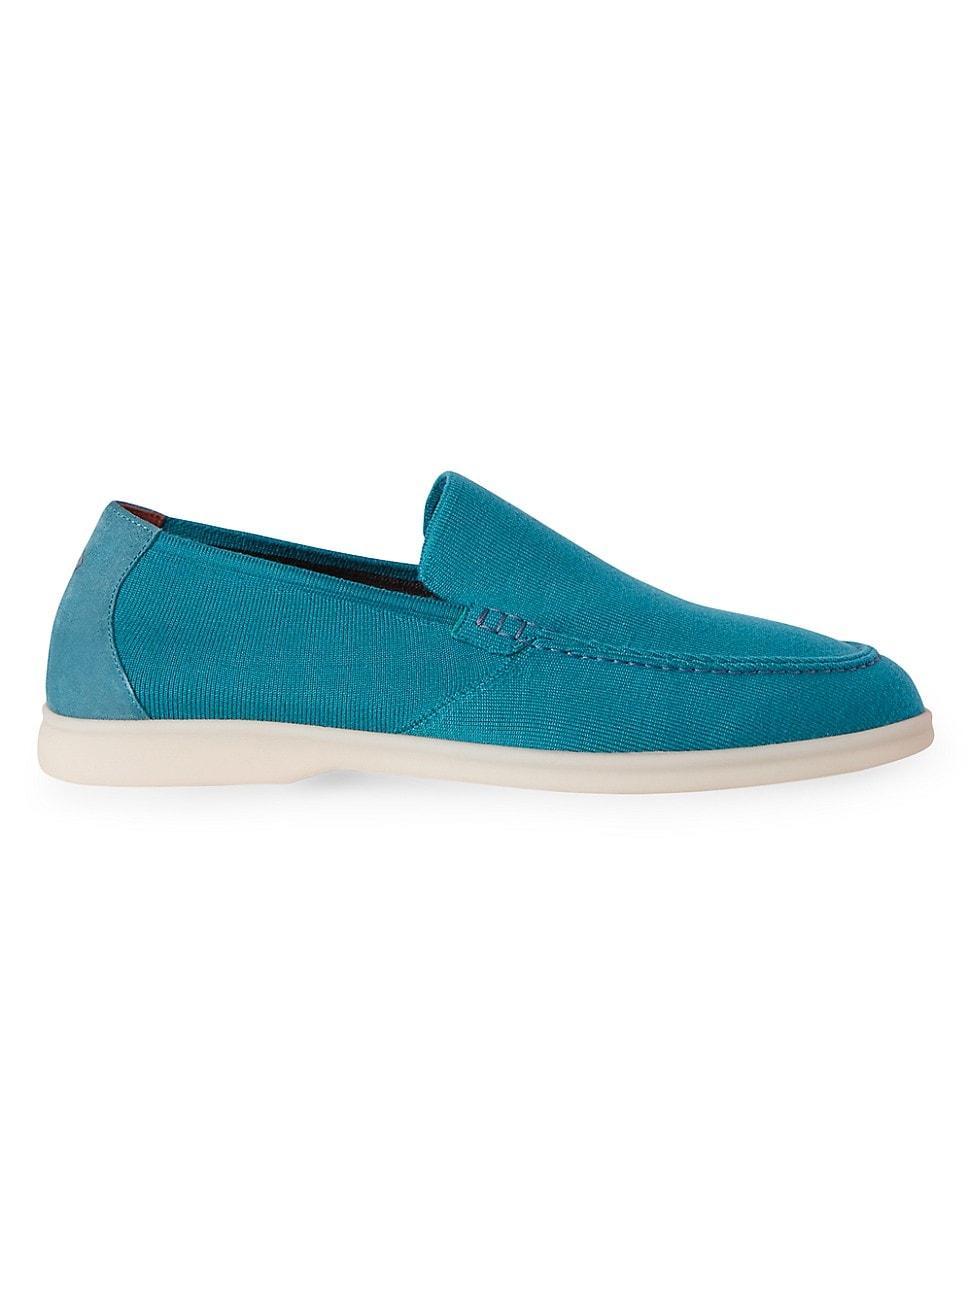 Mens Summer Knit Walk Wish Loafers Product Image